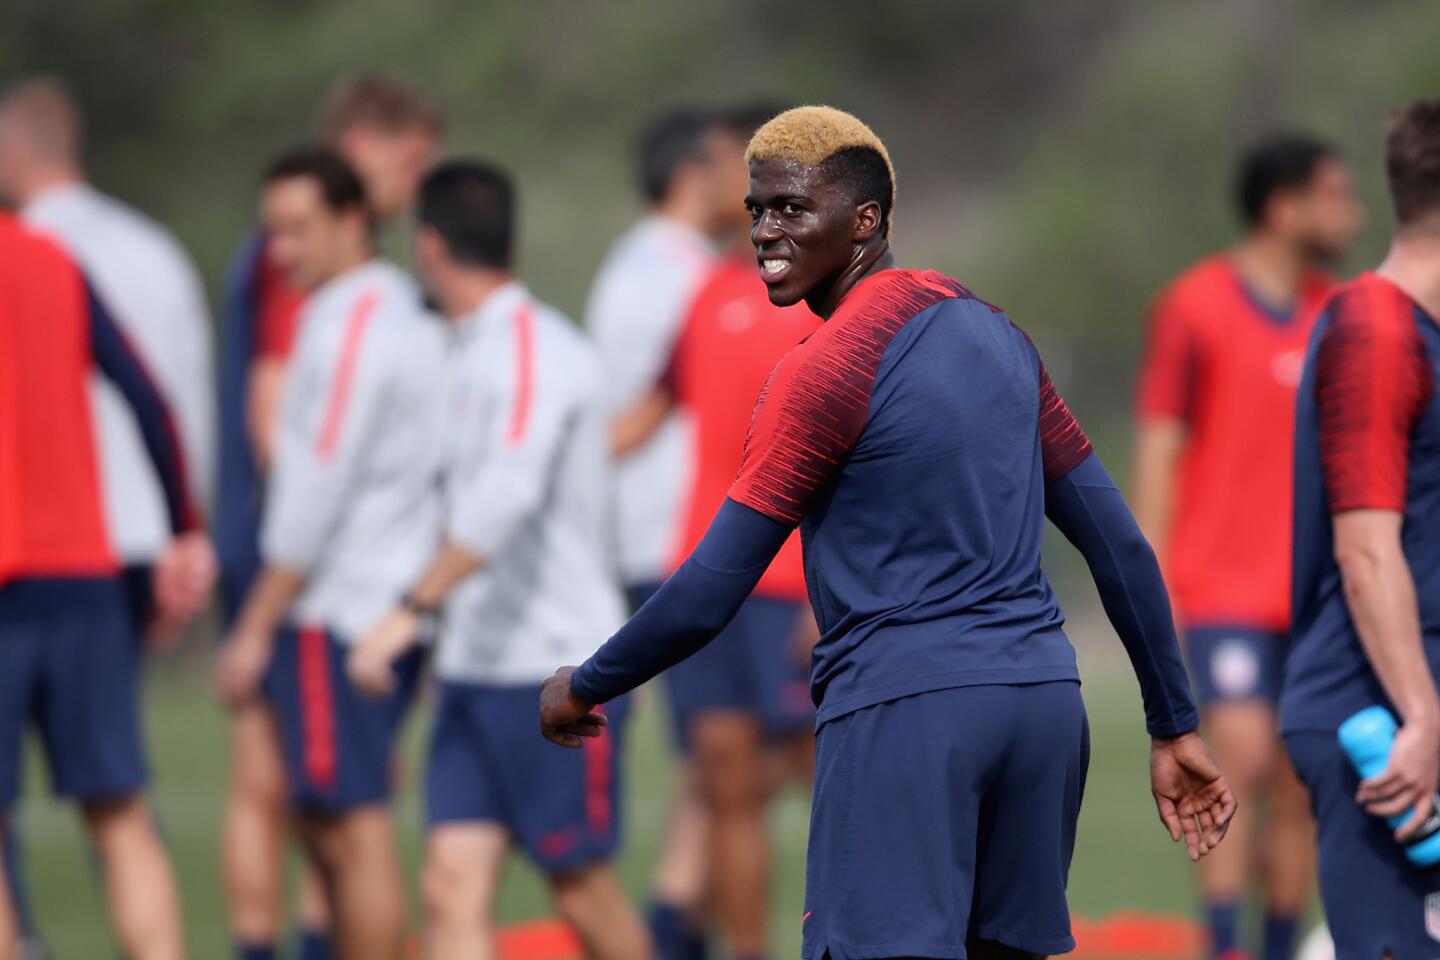 CHULA VISTA, CA - JANUARY 11: Gyasi Zardes of the United States Men's National Soccer Team trains at the U.S. Olympic and Paralympic Training Site on January 11, 2019 in Chula Vista, California. (Photo by Sean M. Haffey/Getty Images) ** OUTS - ELSENT, FPG, CM - OUTS * NM, PH, VA if sourced by CT, LA or MoD **